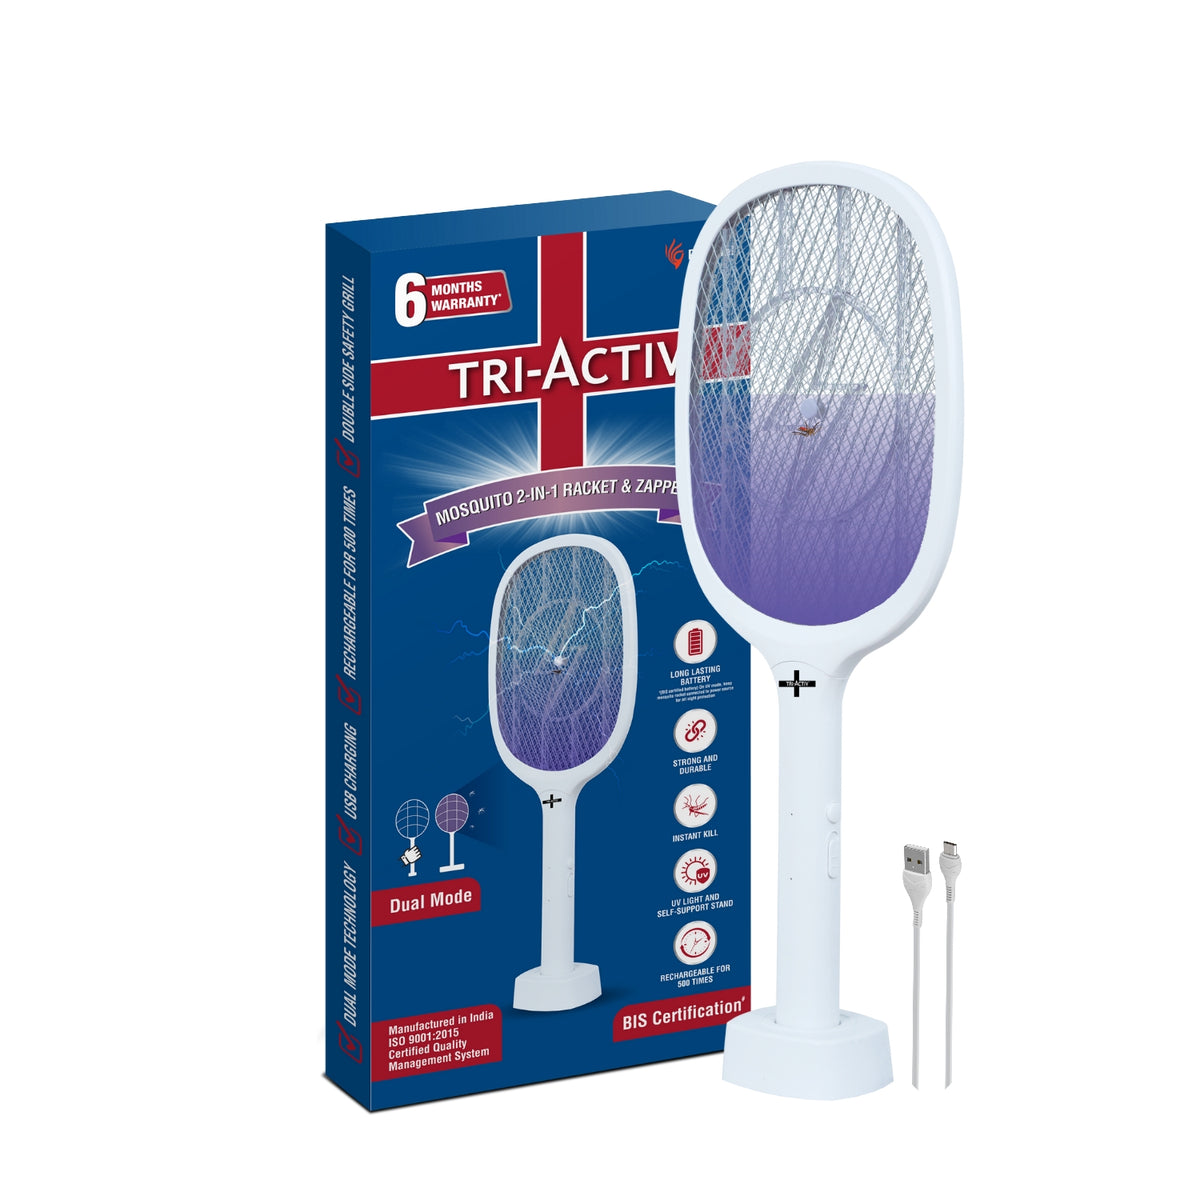 Tri-Activ Mosquito Racket 2-in-1 Dual Mode Rechargeable Bat,Zapper with Stand by Piramal I UV Light I Insect Killer & Fly Swatter I 1200 mAh Li-ion Battery,ISO Certified, 6 Month Warranty